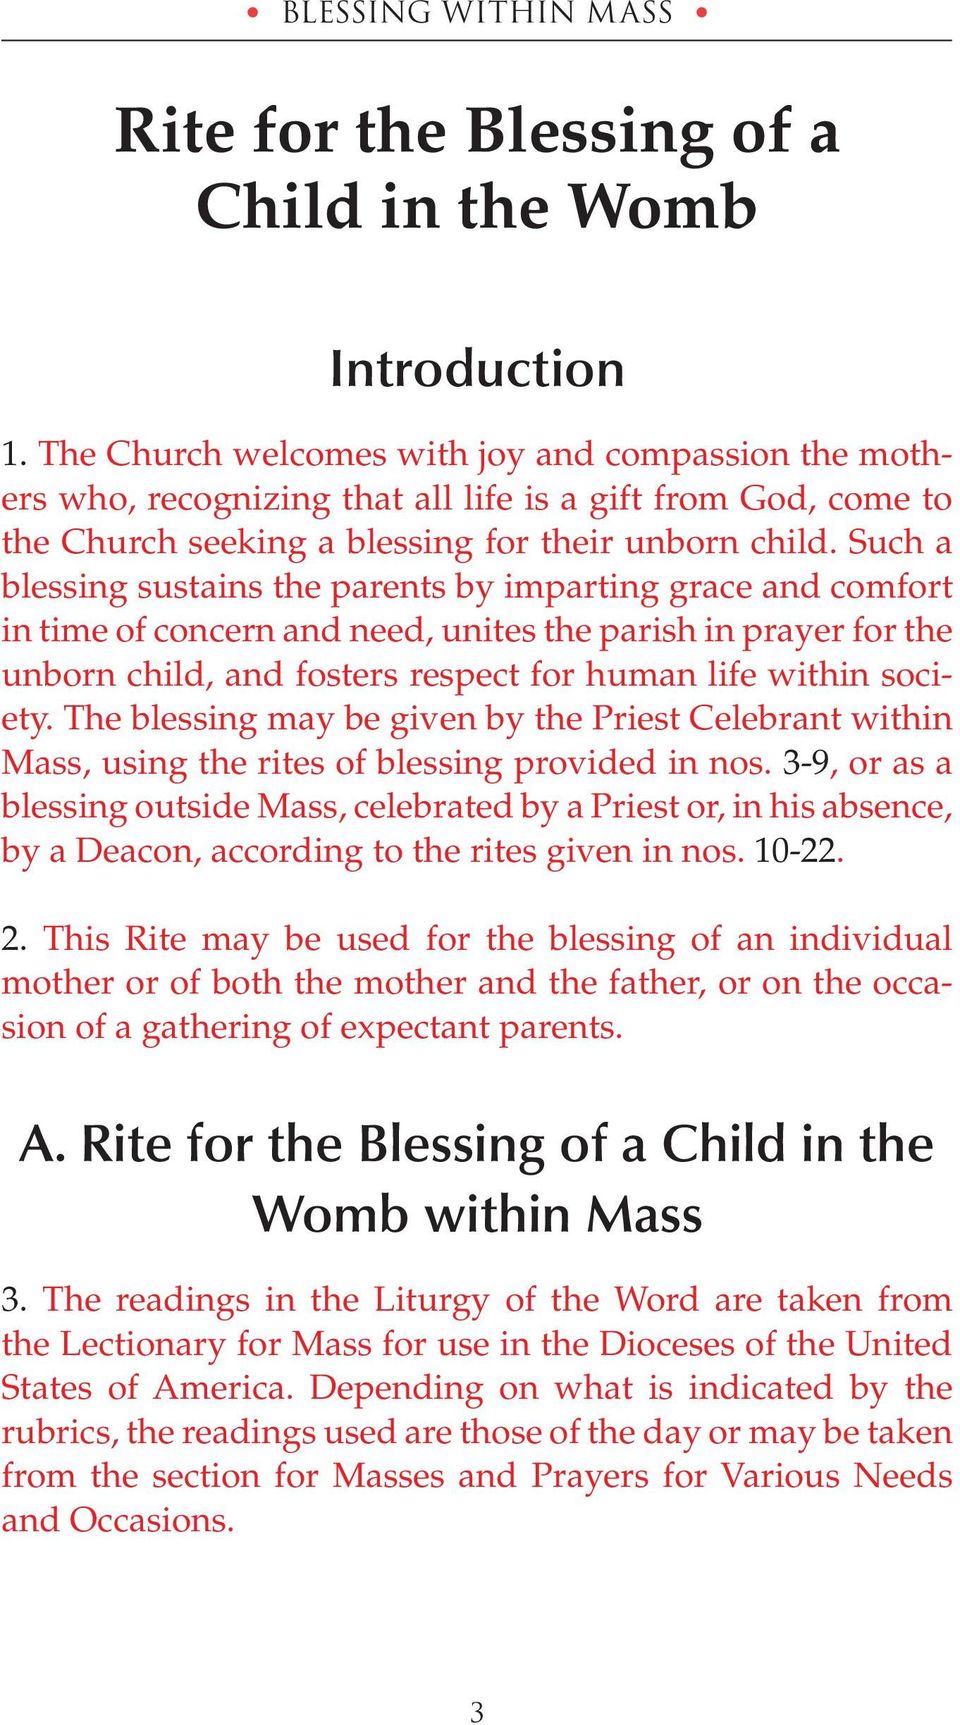 Such a blessing sustains the parents by imparting grace and comfort in time of concern and need, unites the parish in prayer for the unborn child, and fosters respect for human life within society.